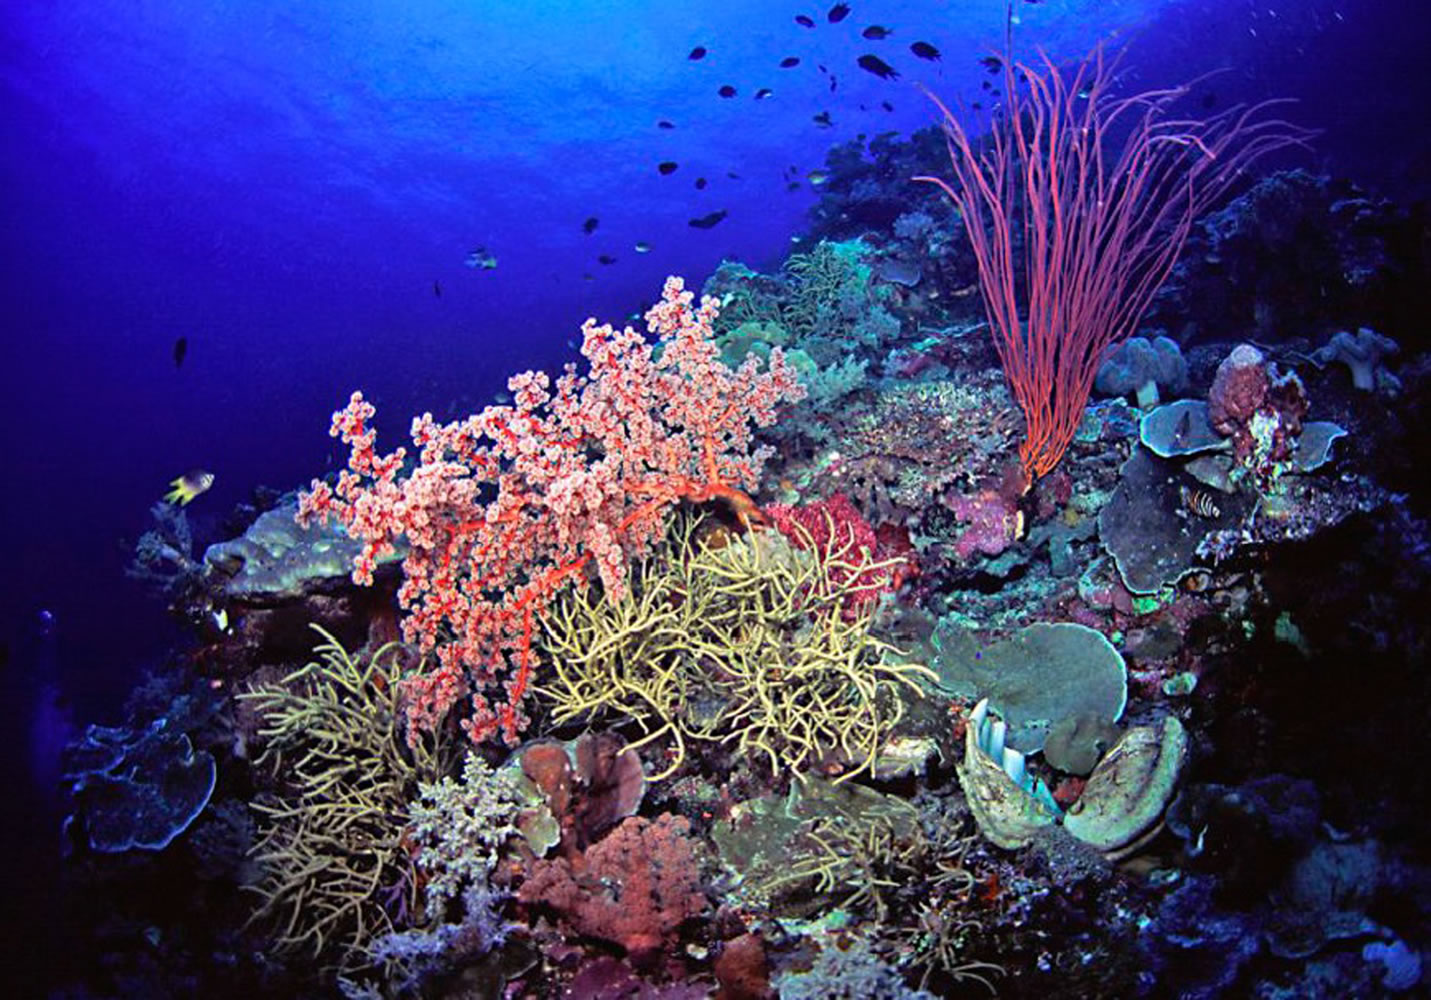 KEOKI STENDER/Marinelifephotography.com
The author of study on climate change says coral species, such as these soft corals in Indonesia, will be the first to be stuck in a new climate and are most vulnerable to change.